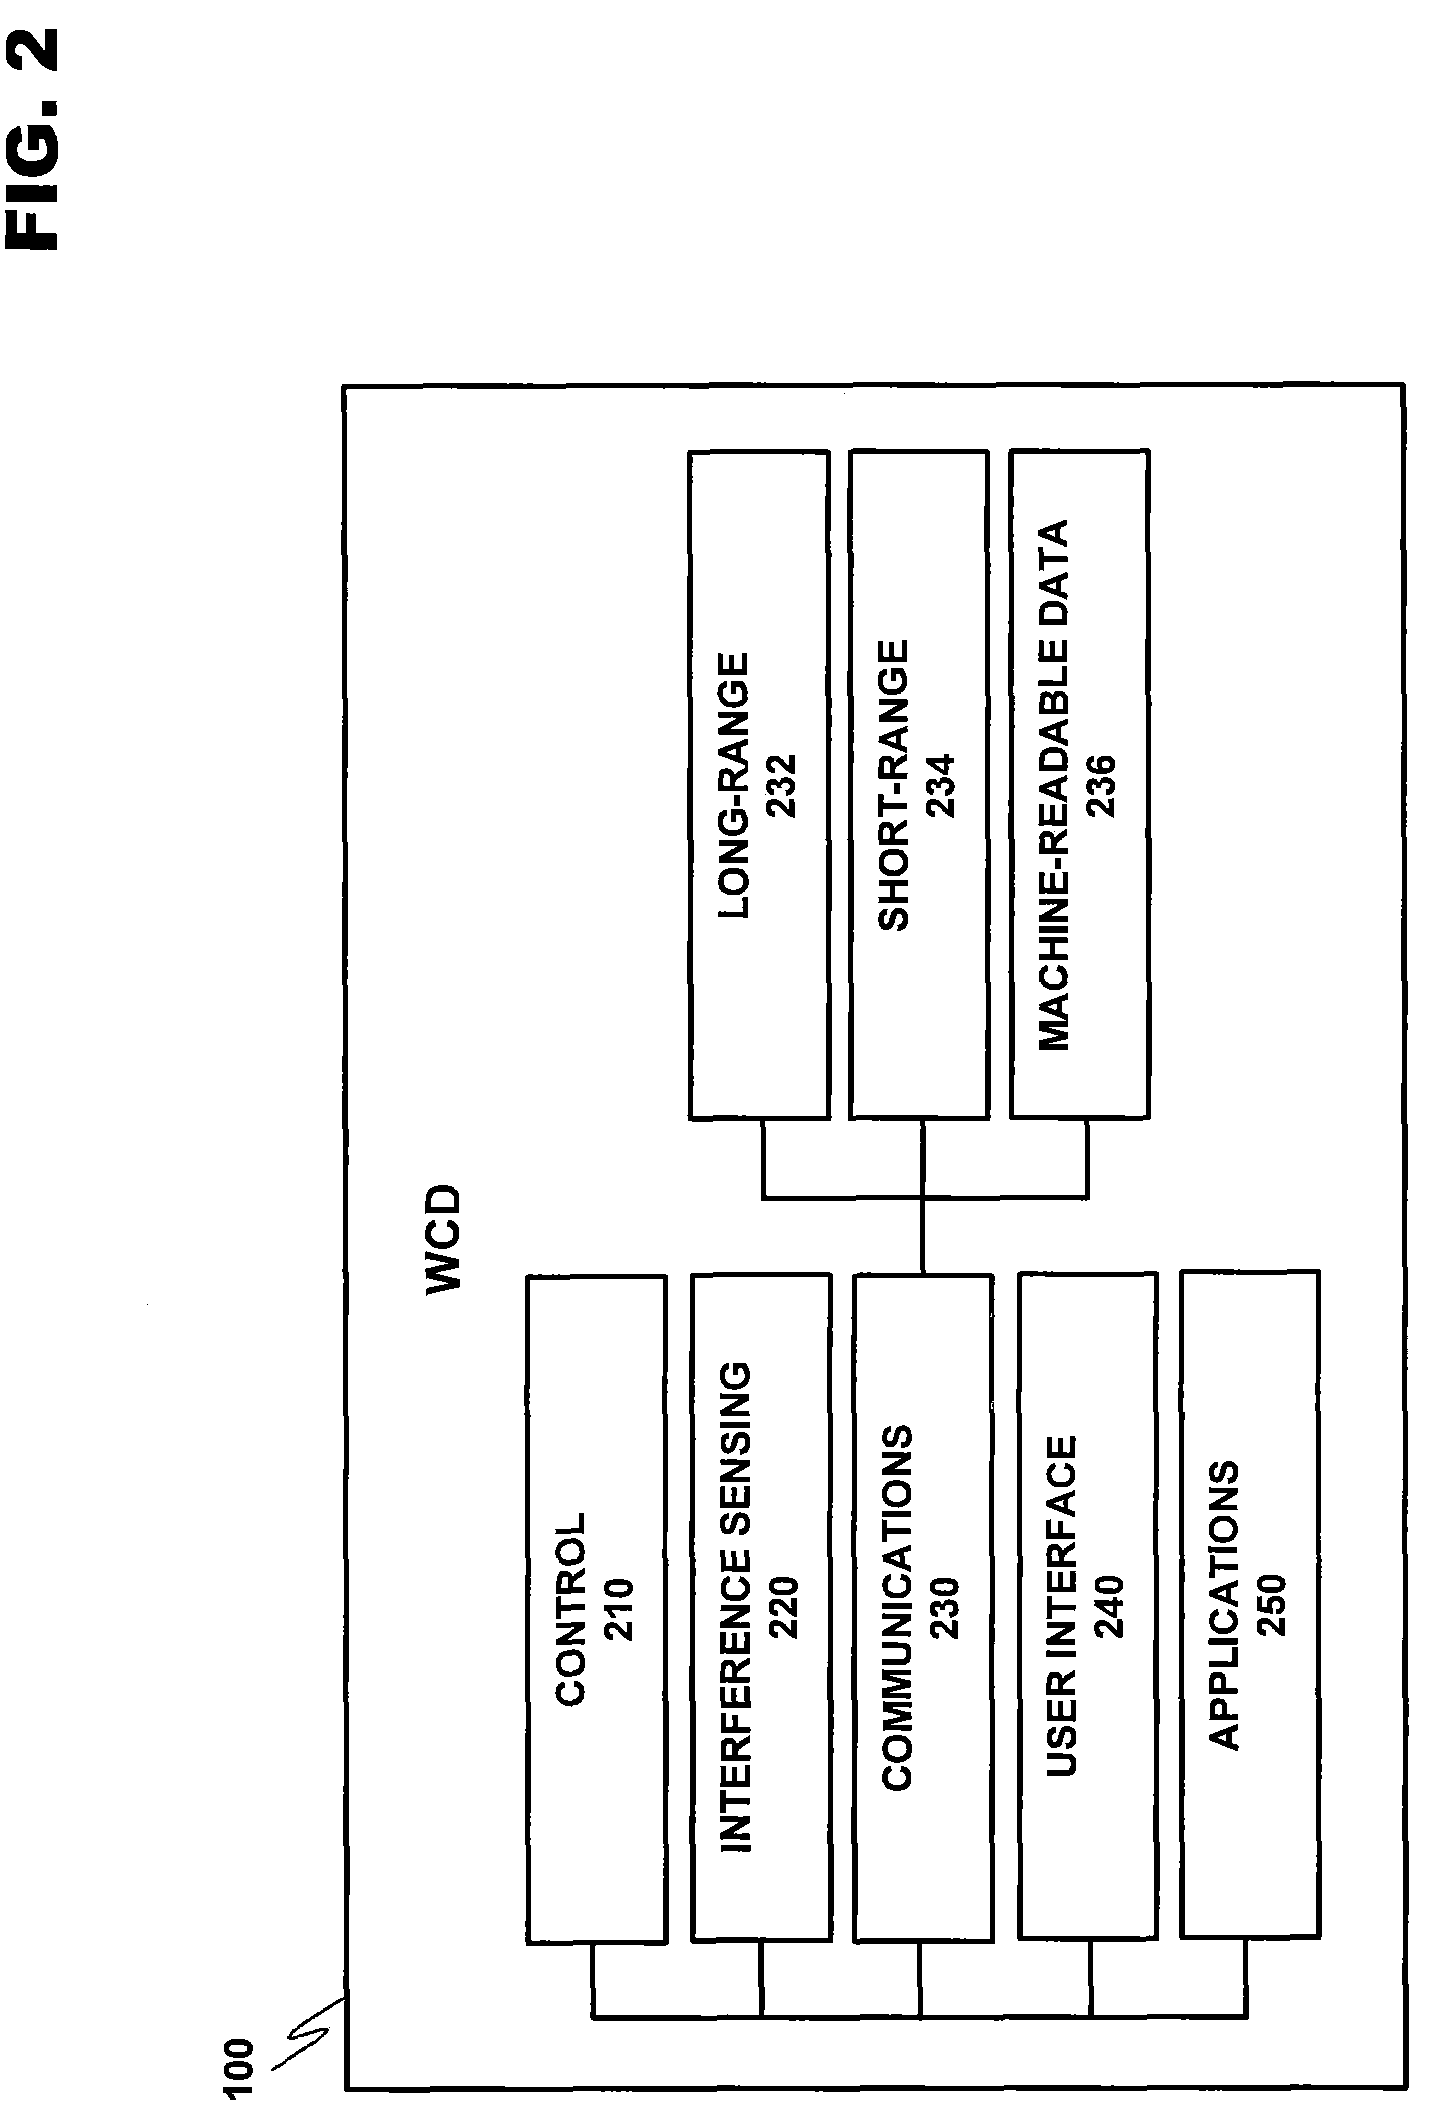 System for managing radio modems